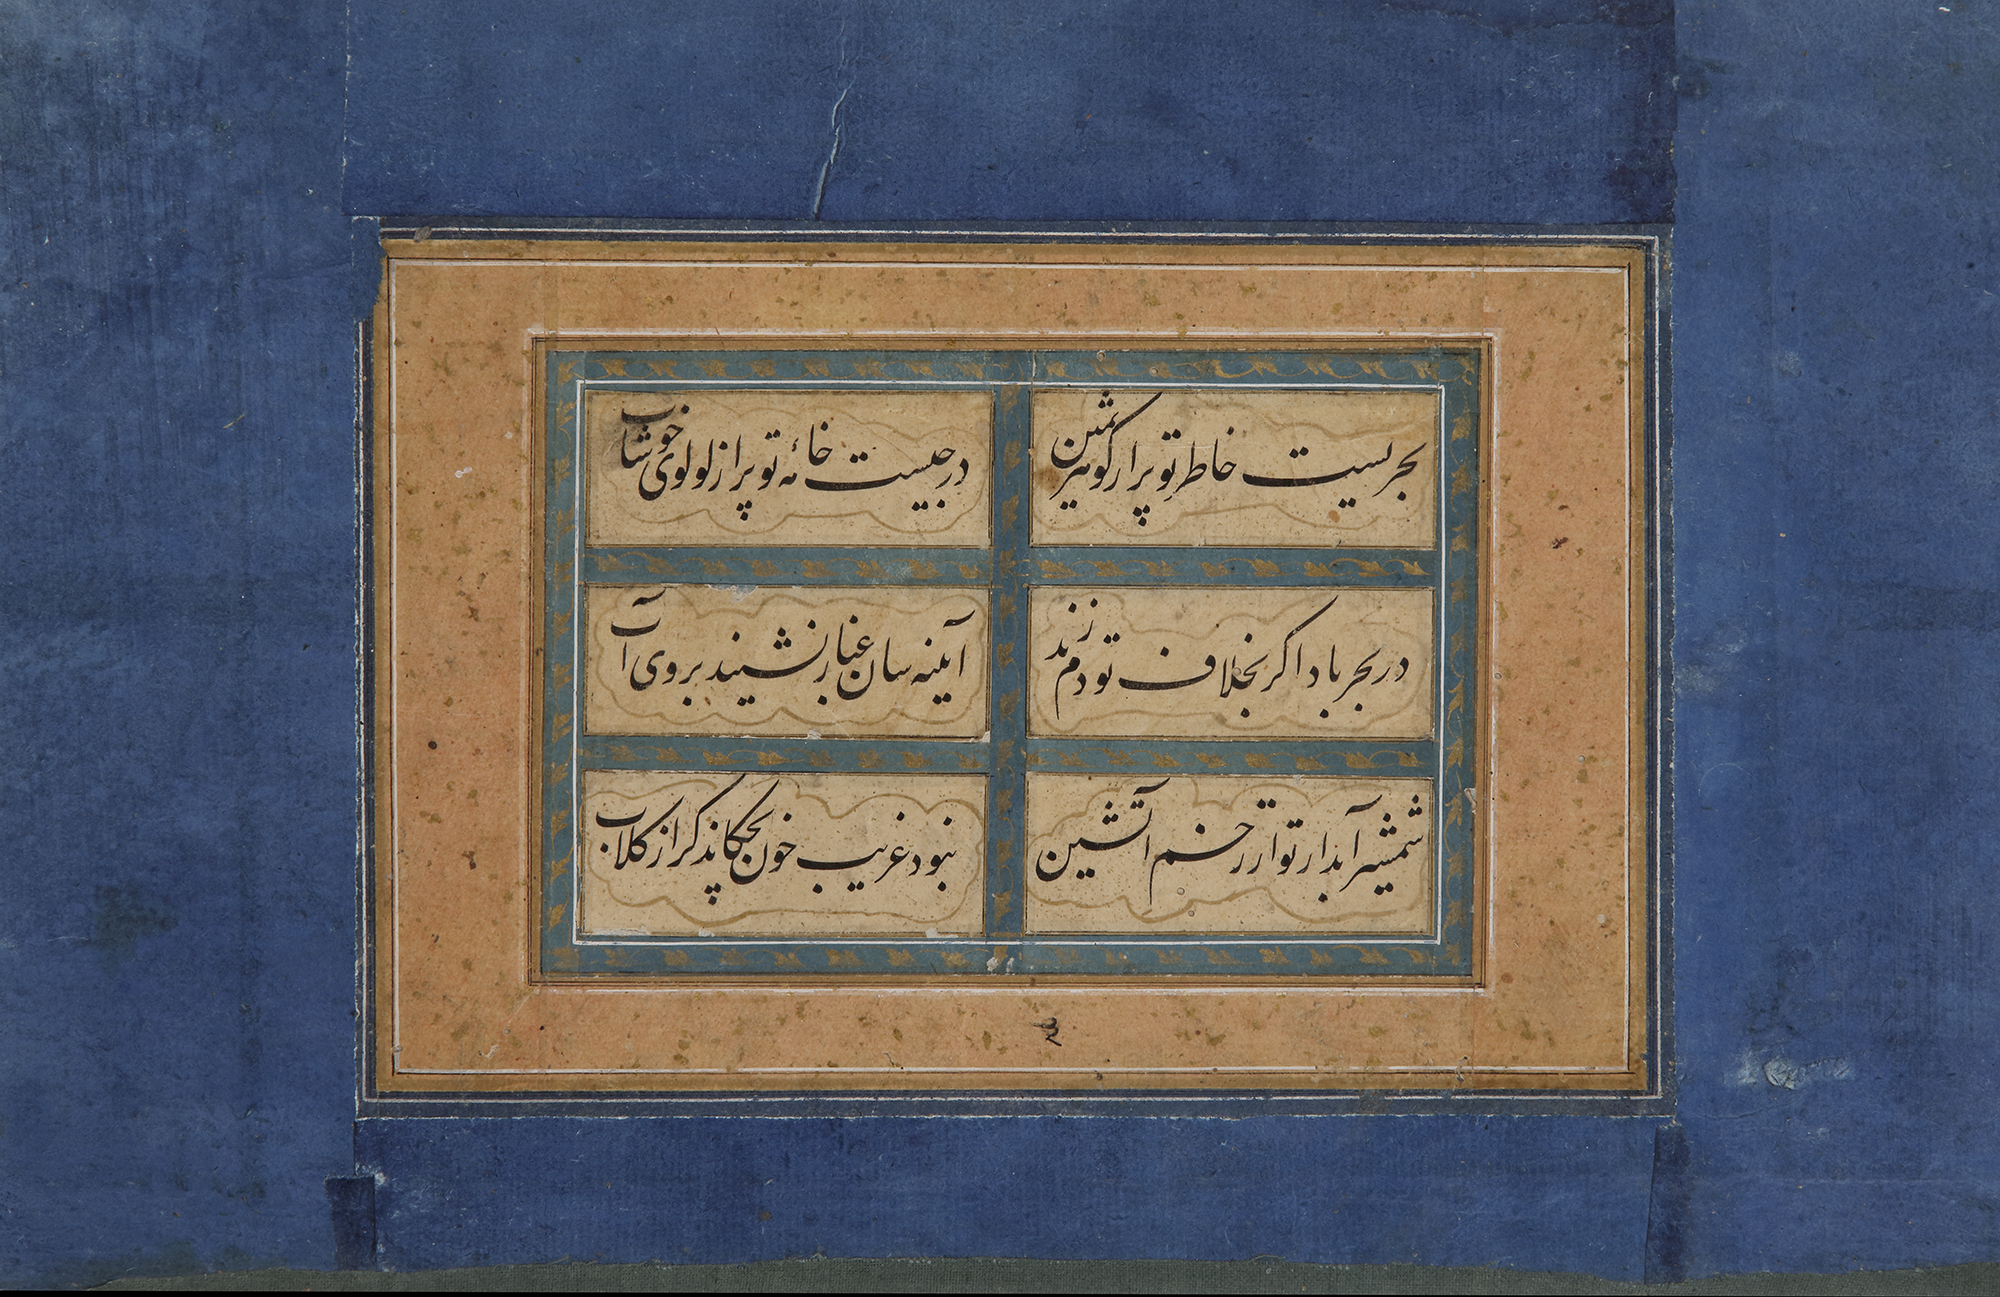 AN OTTOMAN CALLIGRAPHY PAGE FROM A MURAQQA ALBUM, TURKEY, 18TH CENTURY - Image 4 of 4